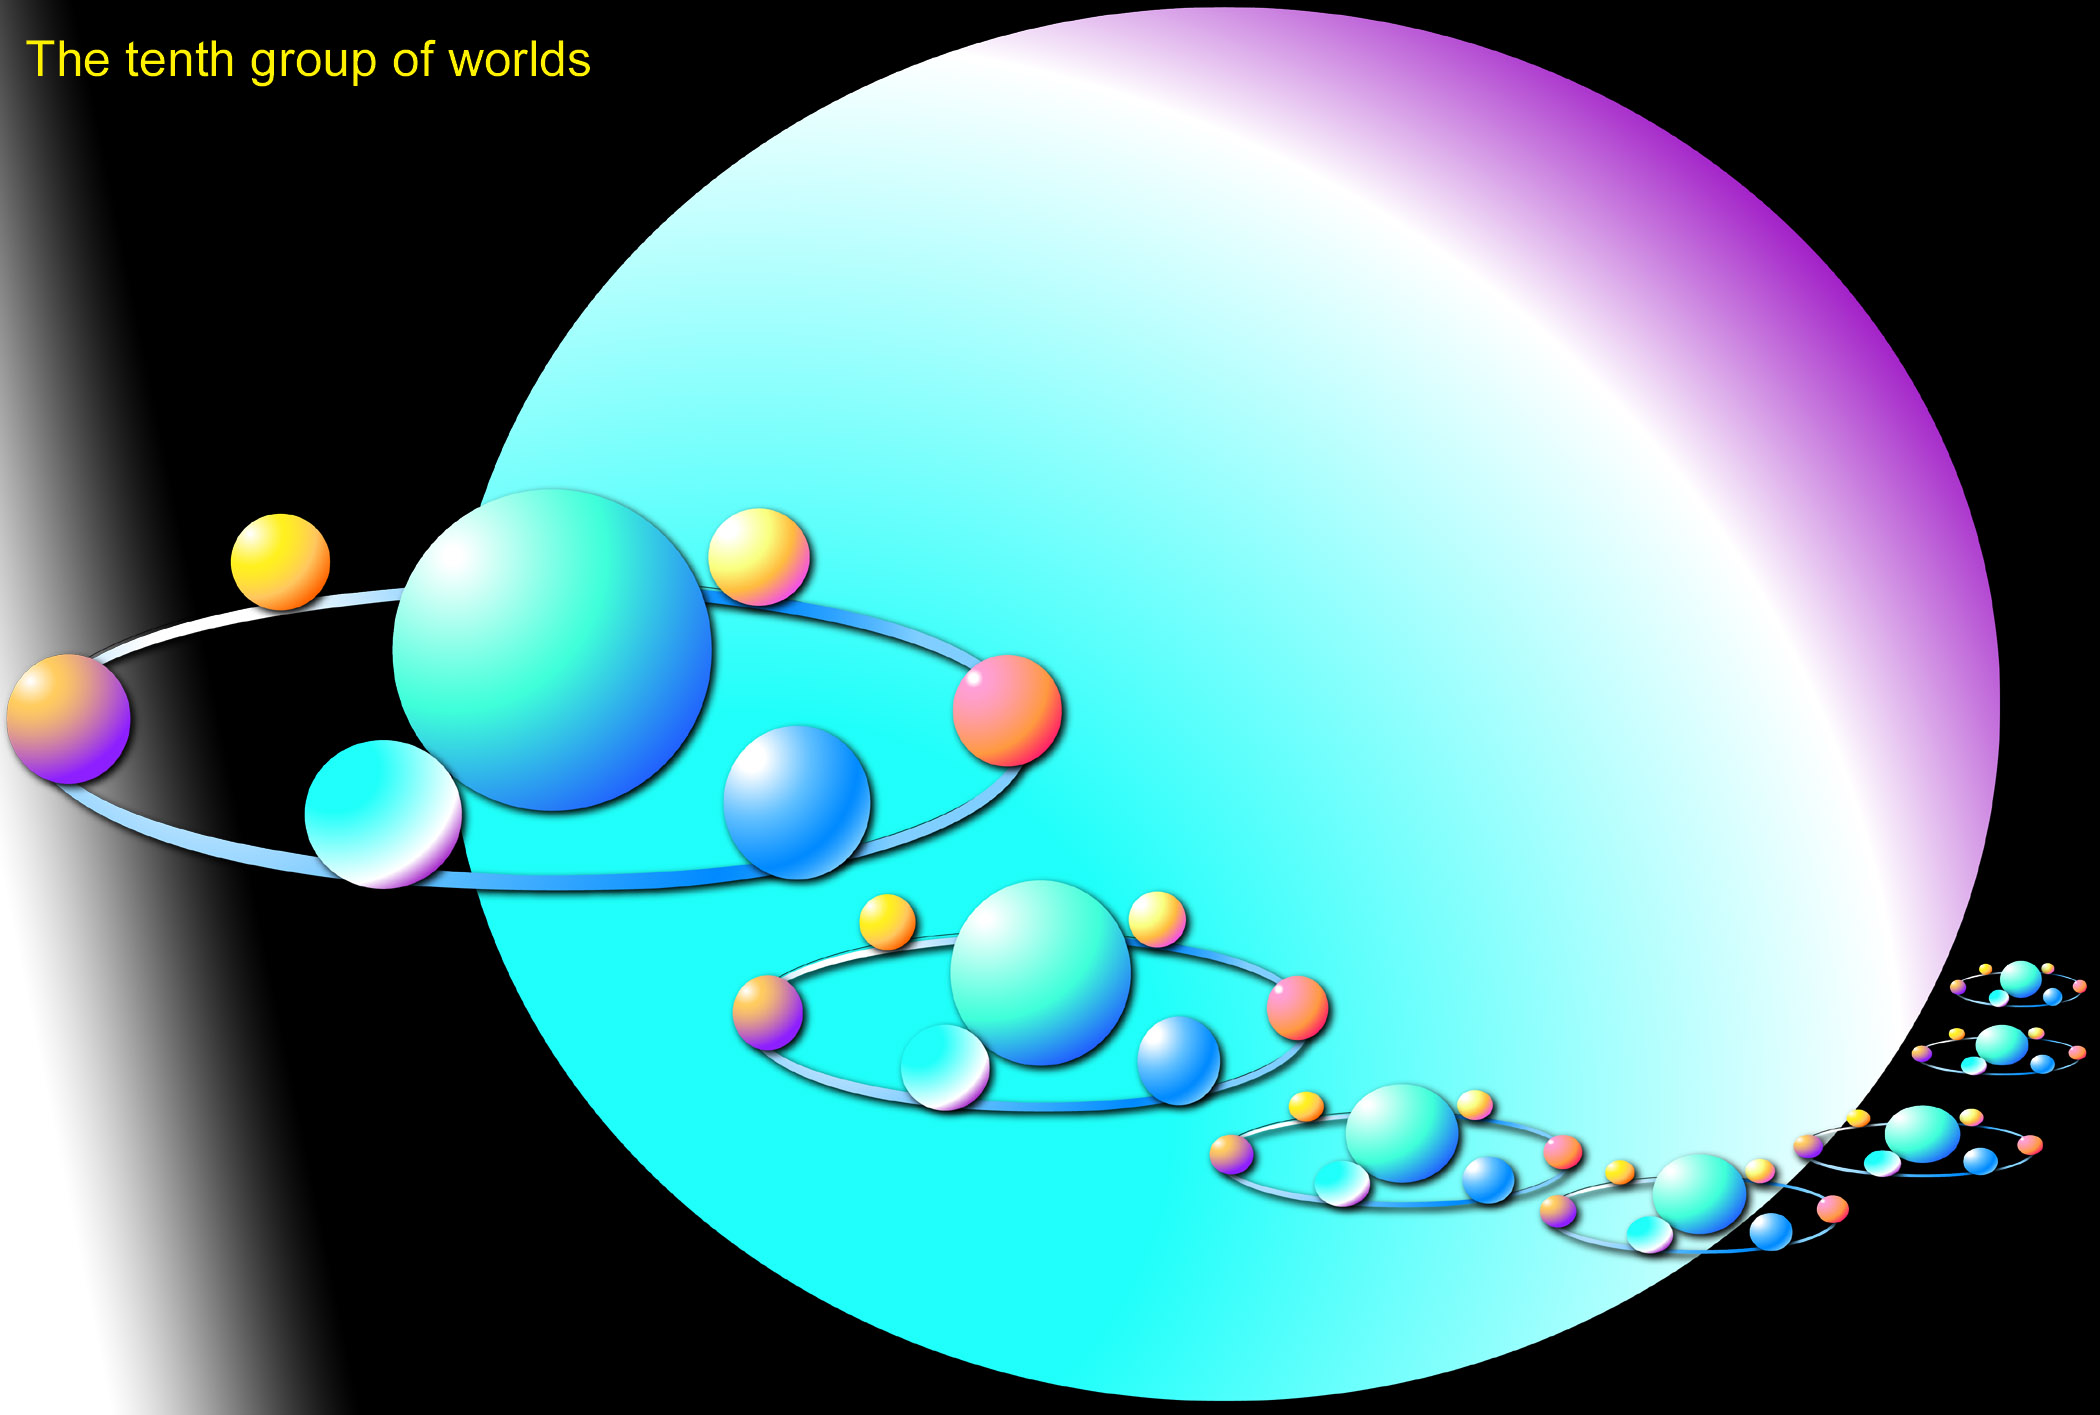 salvington surrounded by ten university clusters of 
forty-nine spheres each 